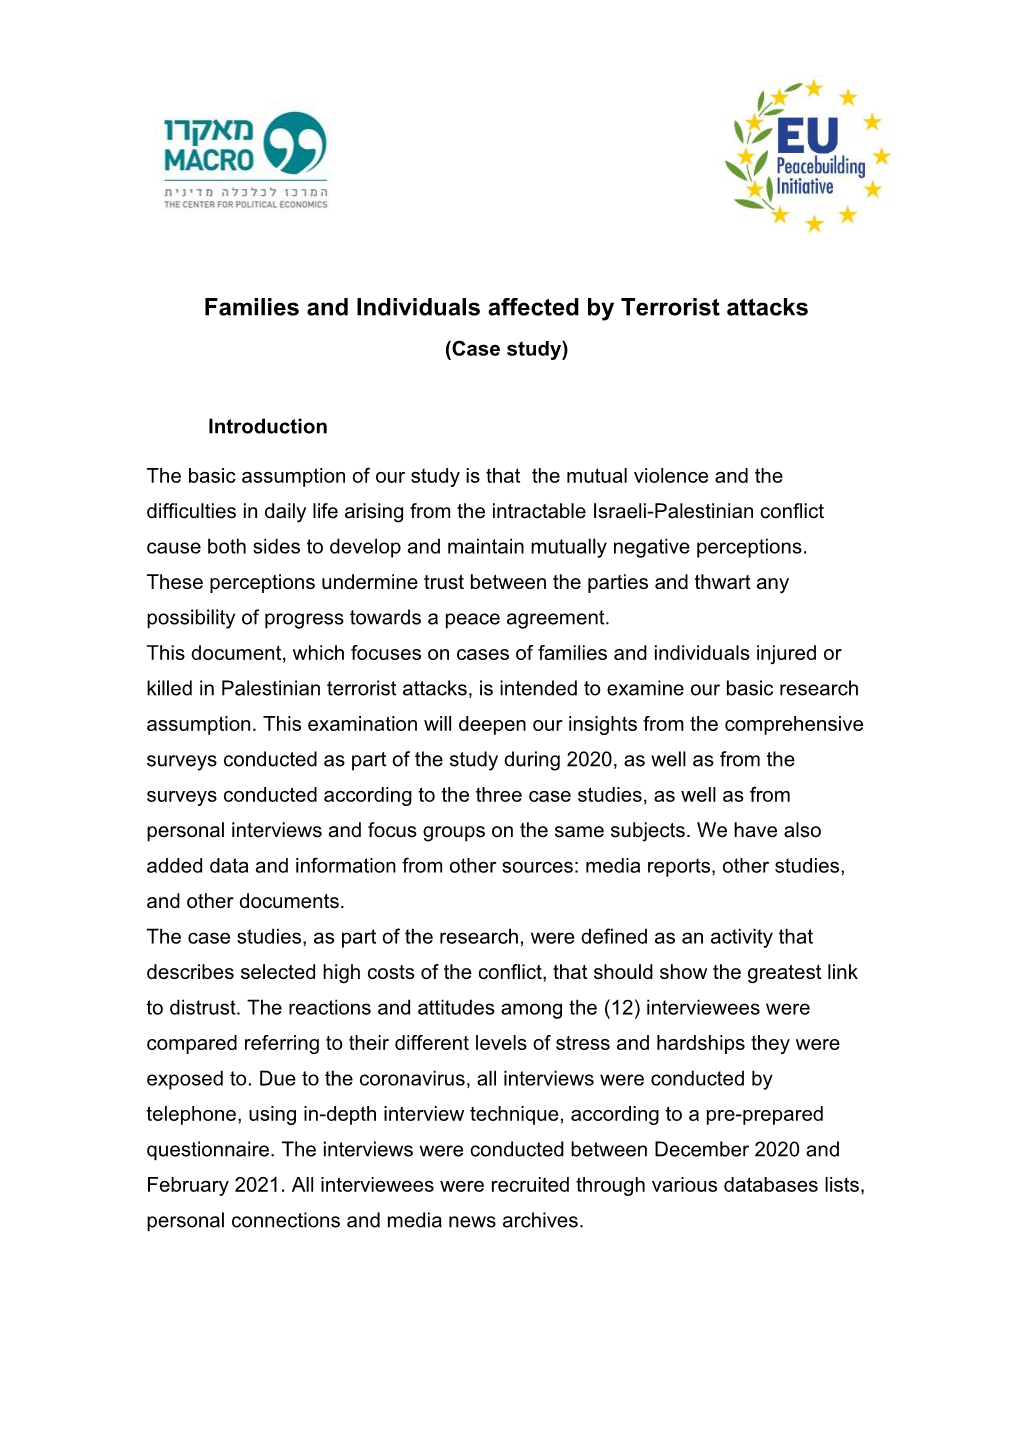 Families and Individuals Affected by Terrorist Attacks (Case Study)